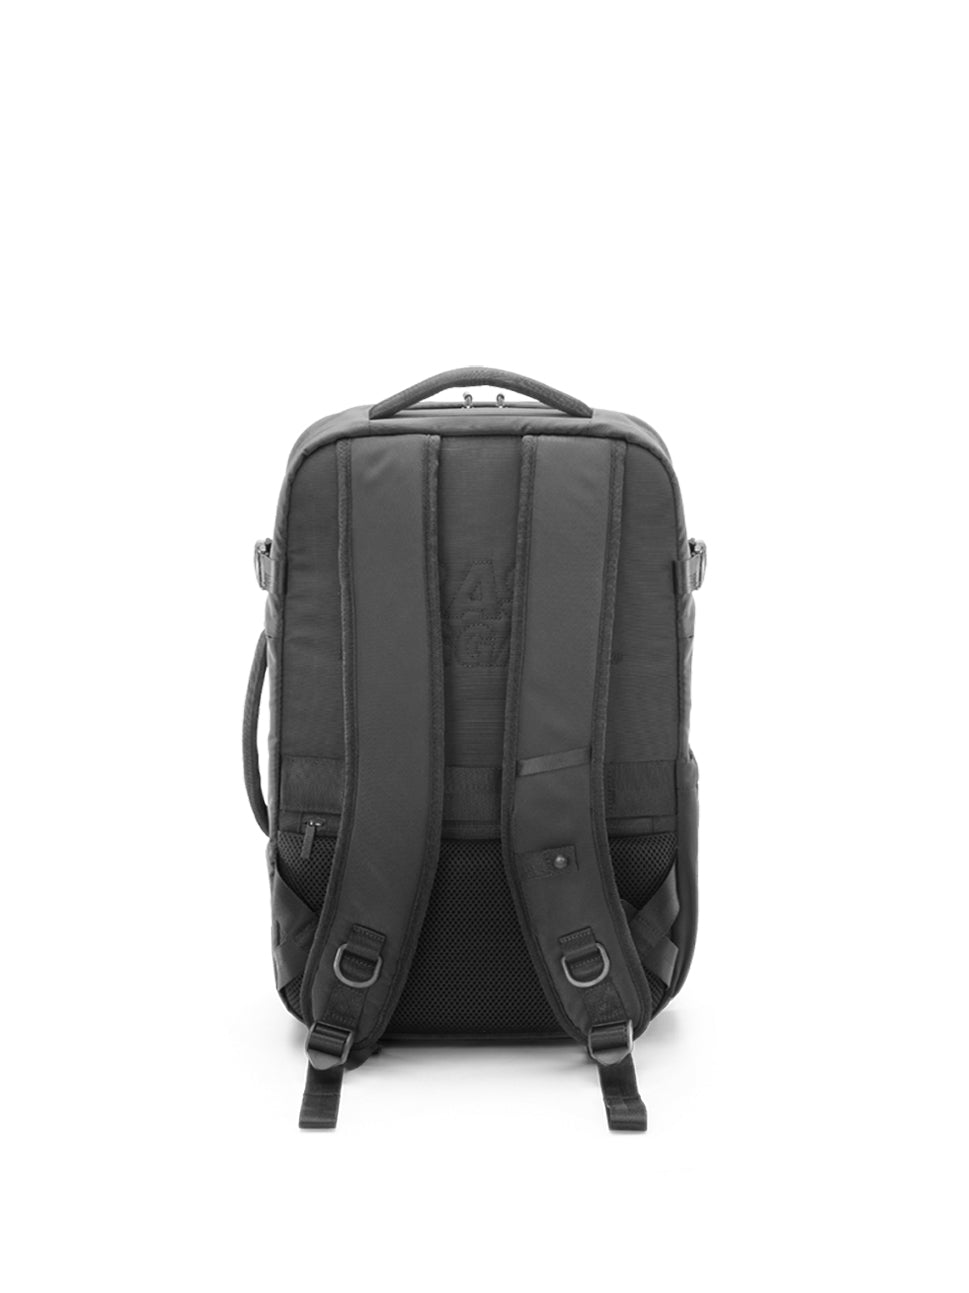 Crash Baggage Iconic Backpack, CB310 021, Silver